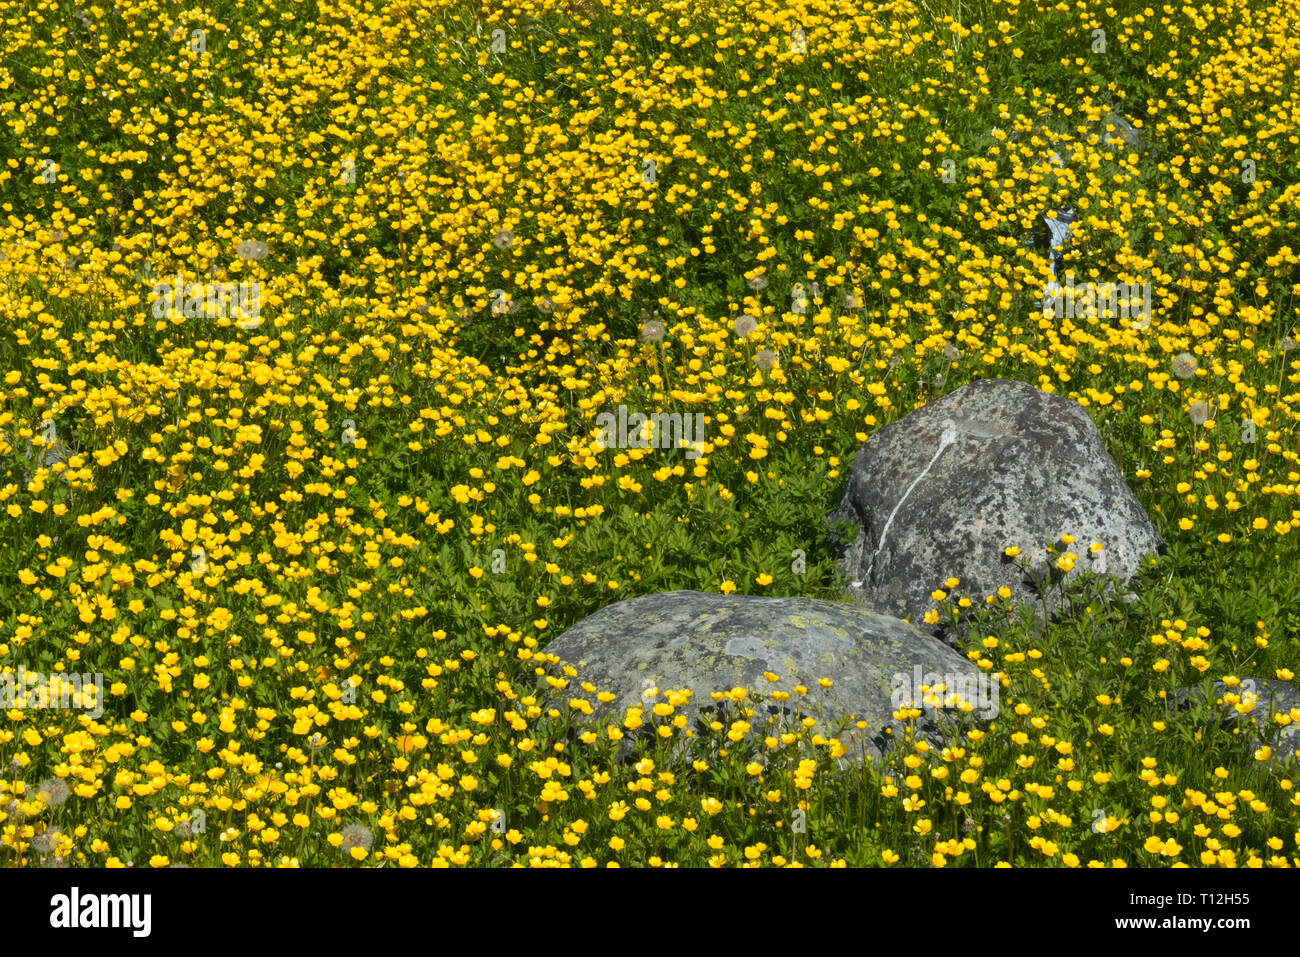 Yellow flower ground cover, Artic root (Rhodiola rosea), Nuuk, Greenland Stock Photo